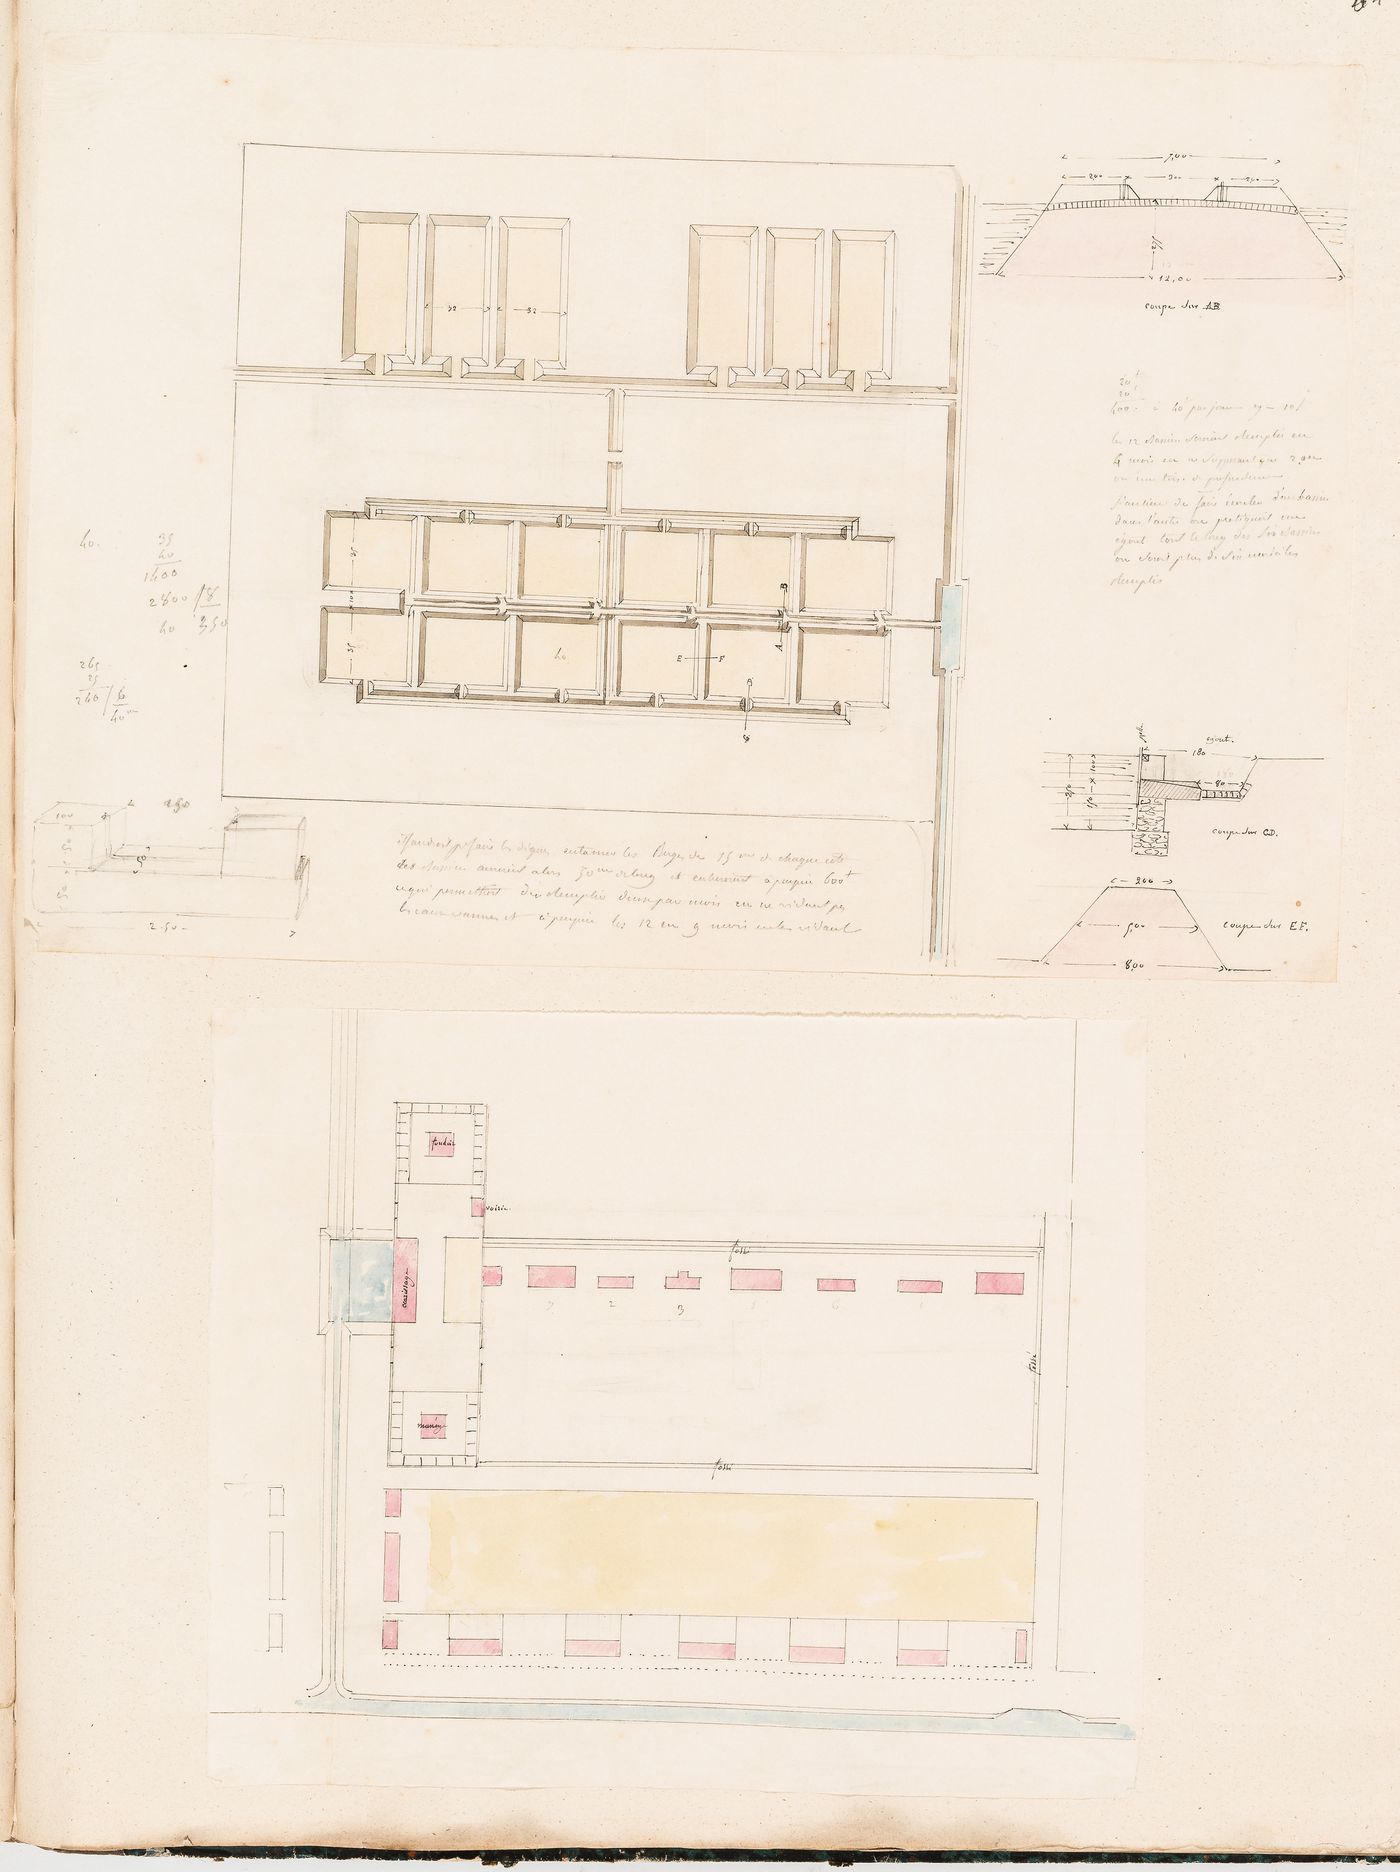 Project for Clos d'équarrissage, fôret de Bondy: Plan and sections, probably showing the system of canals and basins comprising the "voiries"